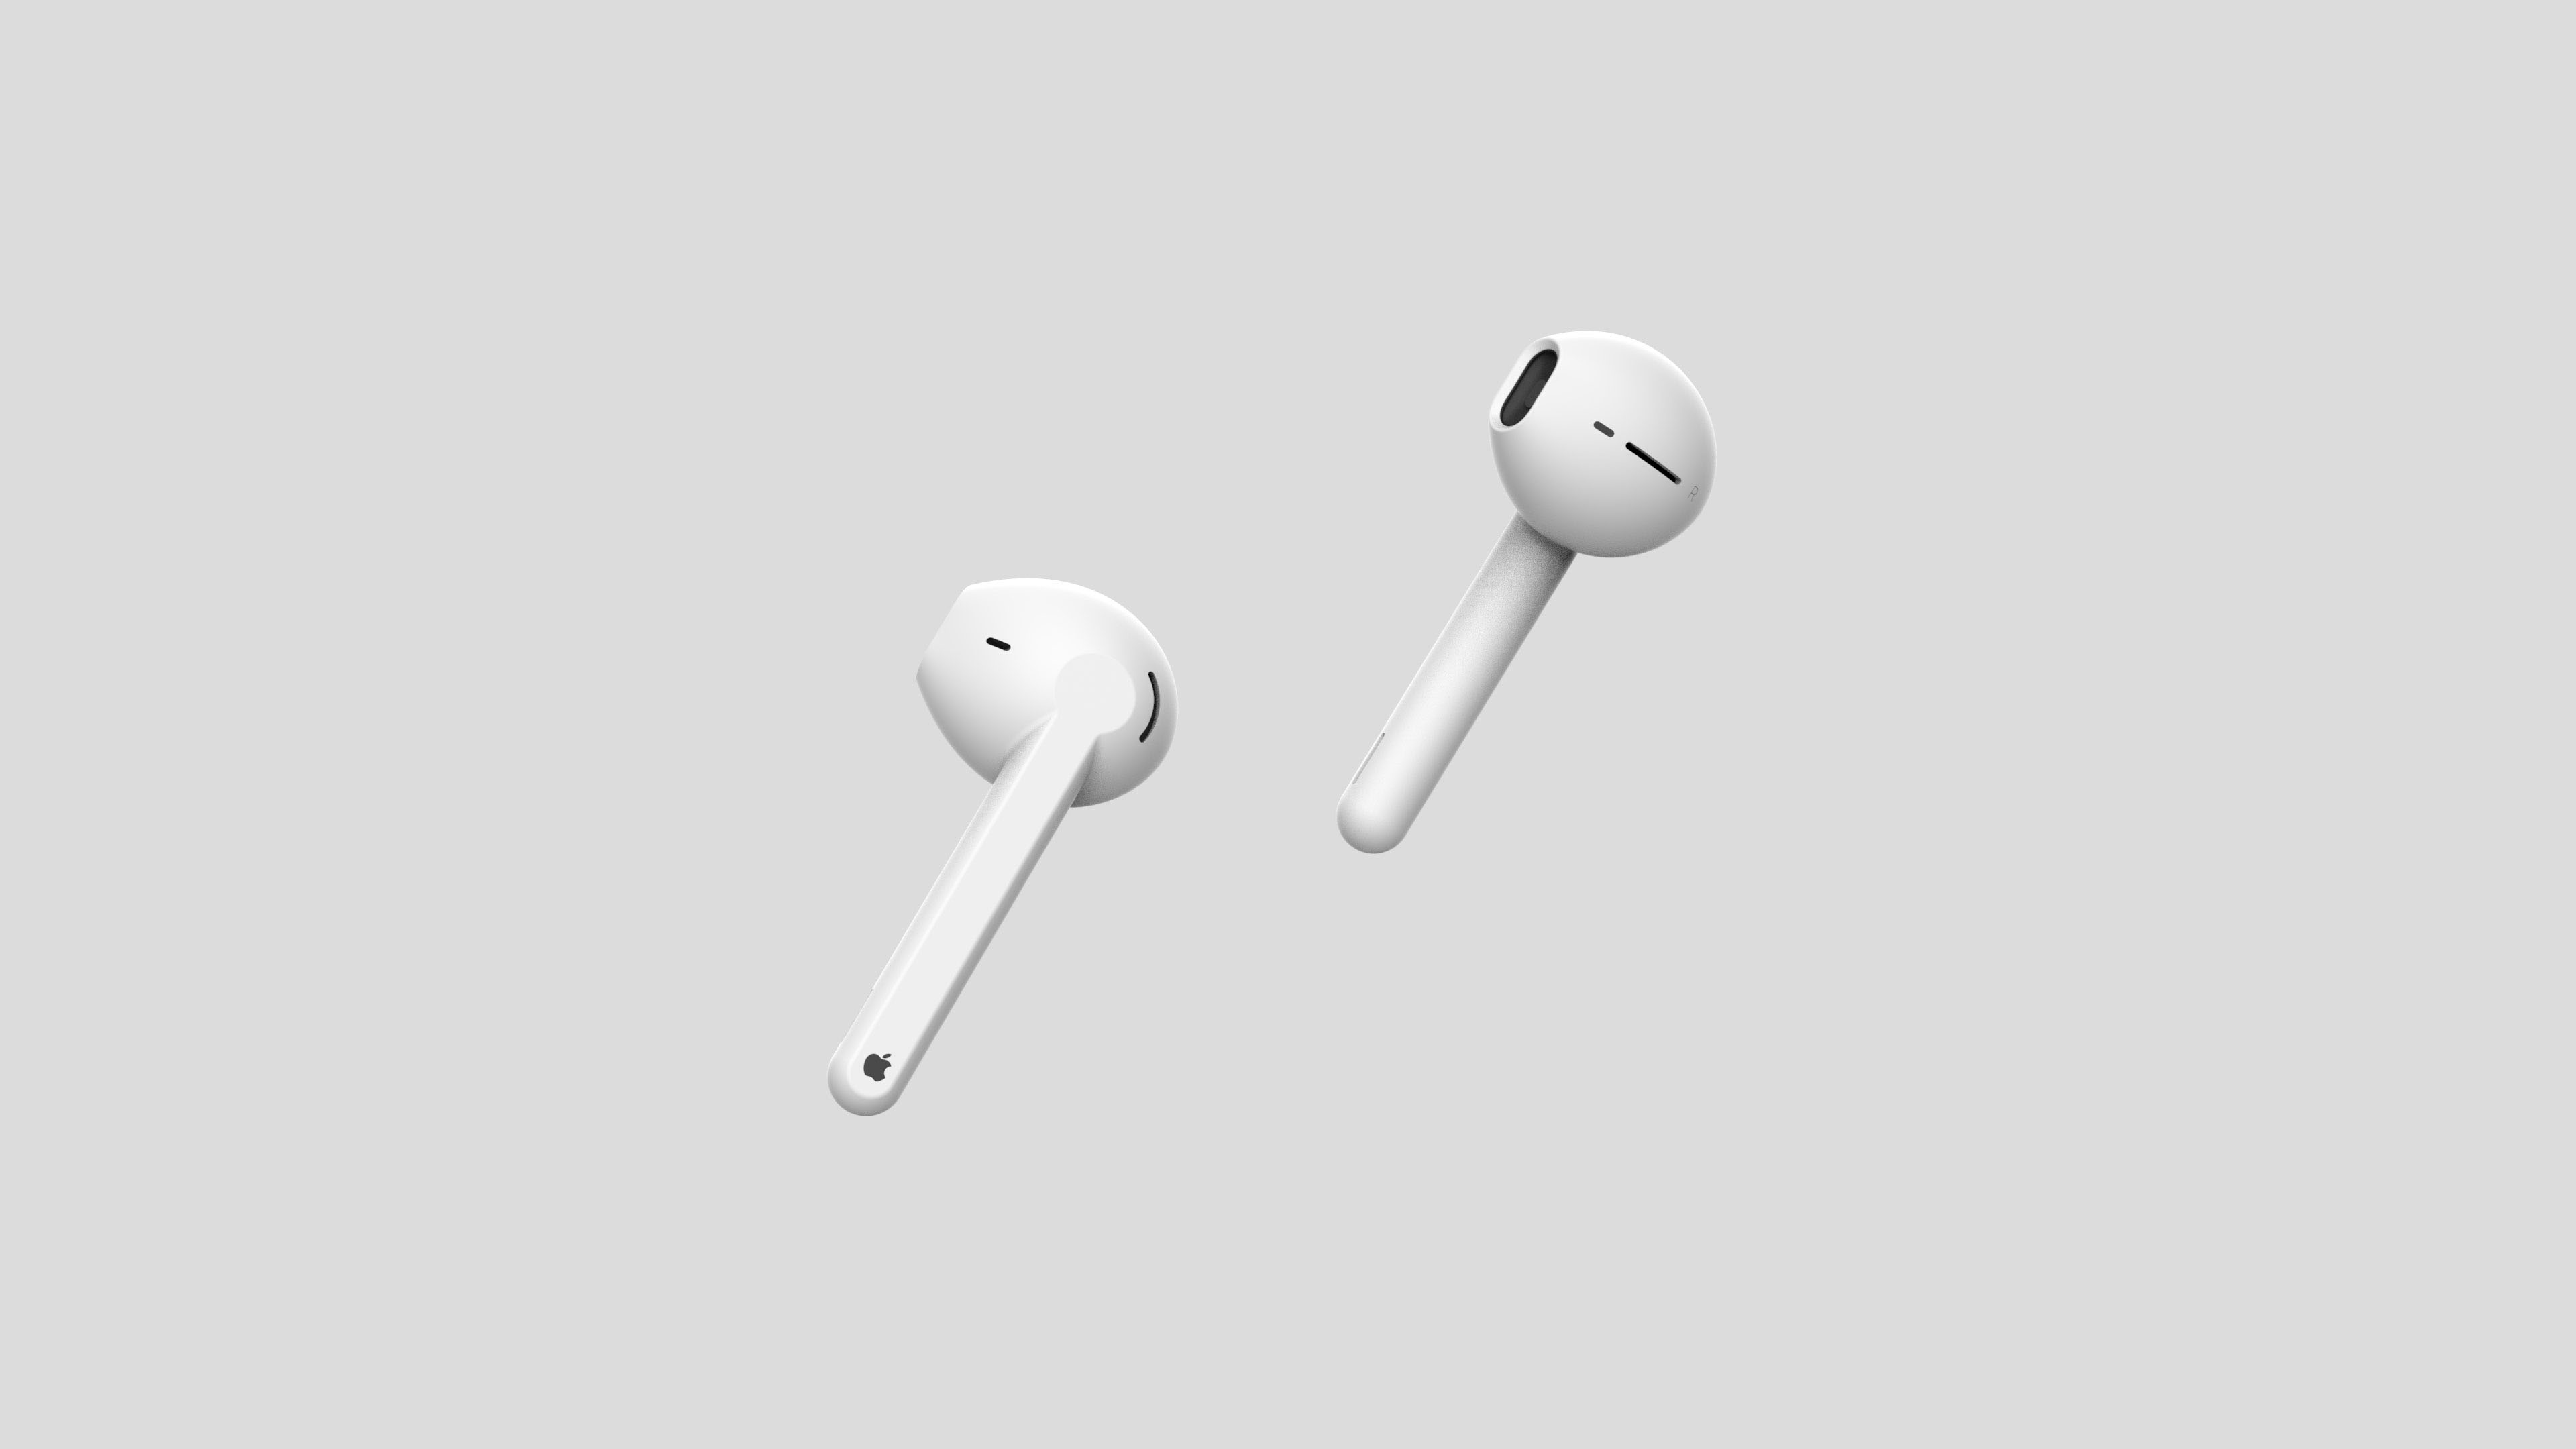 Airpods маркет. Эирподс 3. Apple AIRPODS Pro 3. AIRPODS 2 И 3. Air POSD 3.